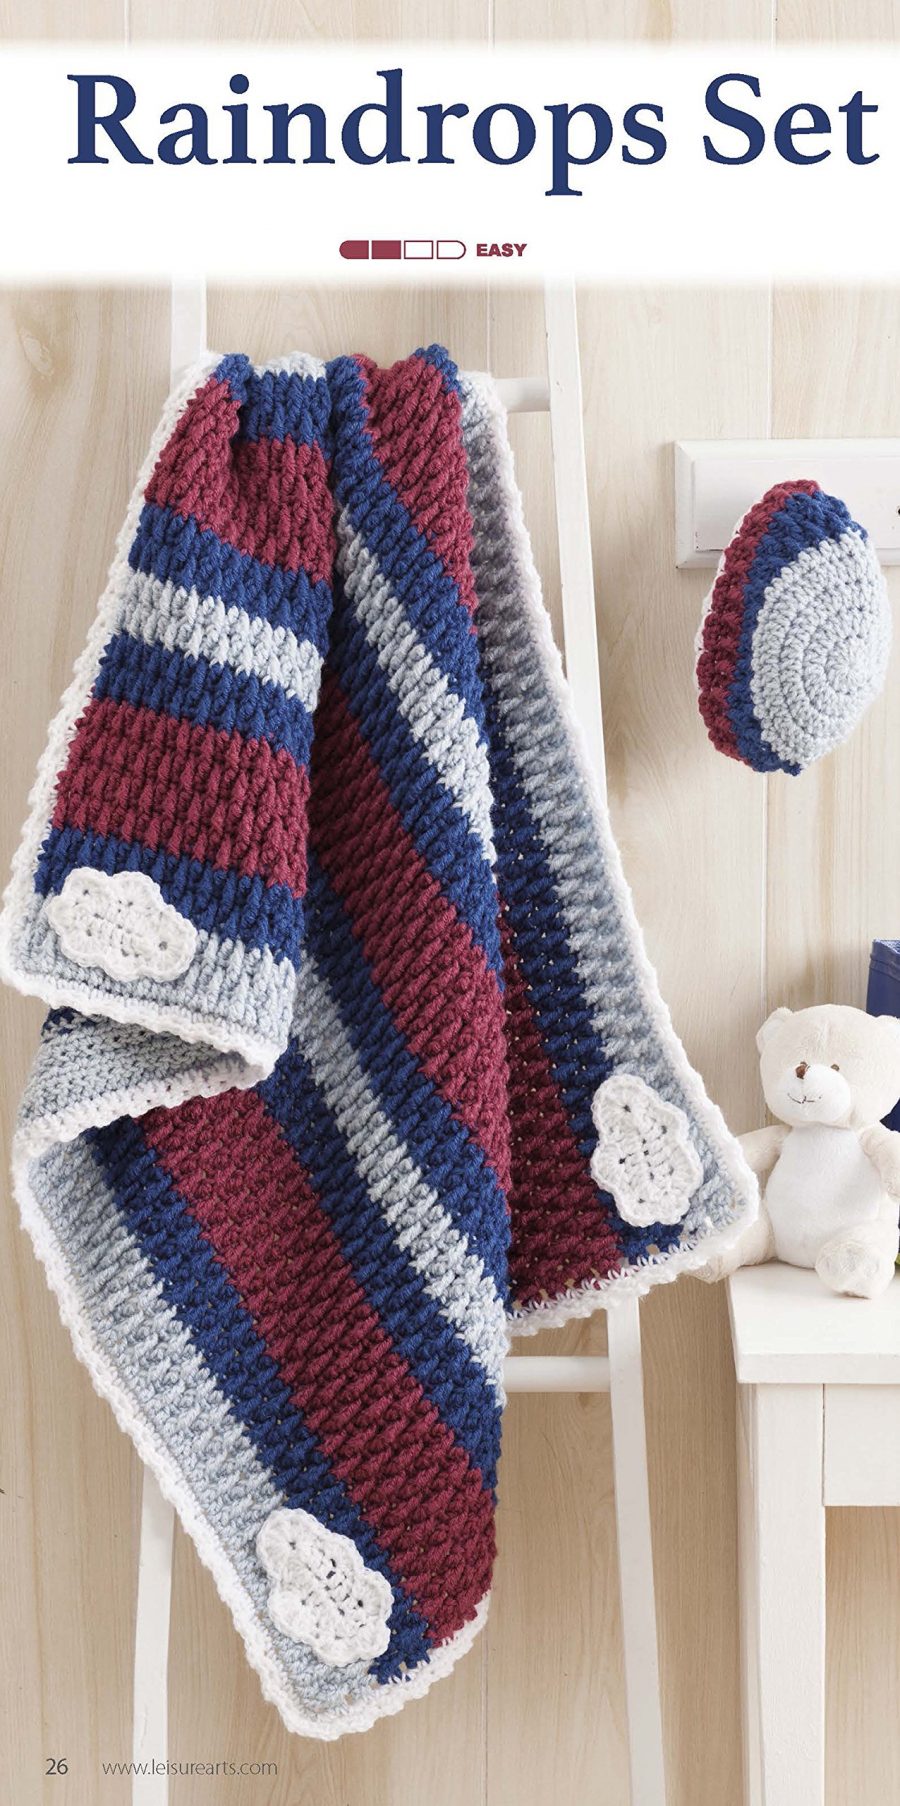 Nature's Gifts for Baby | Crochet Pattern - Matching baby blanket and hat - rain drops